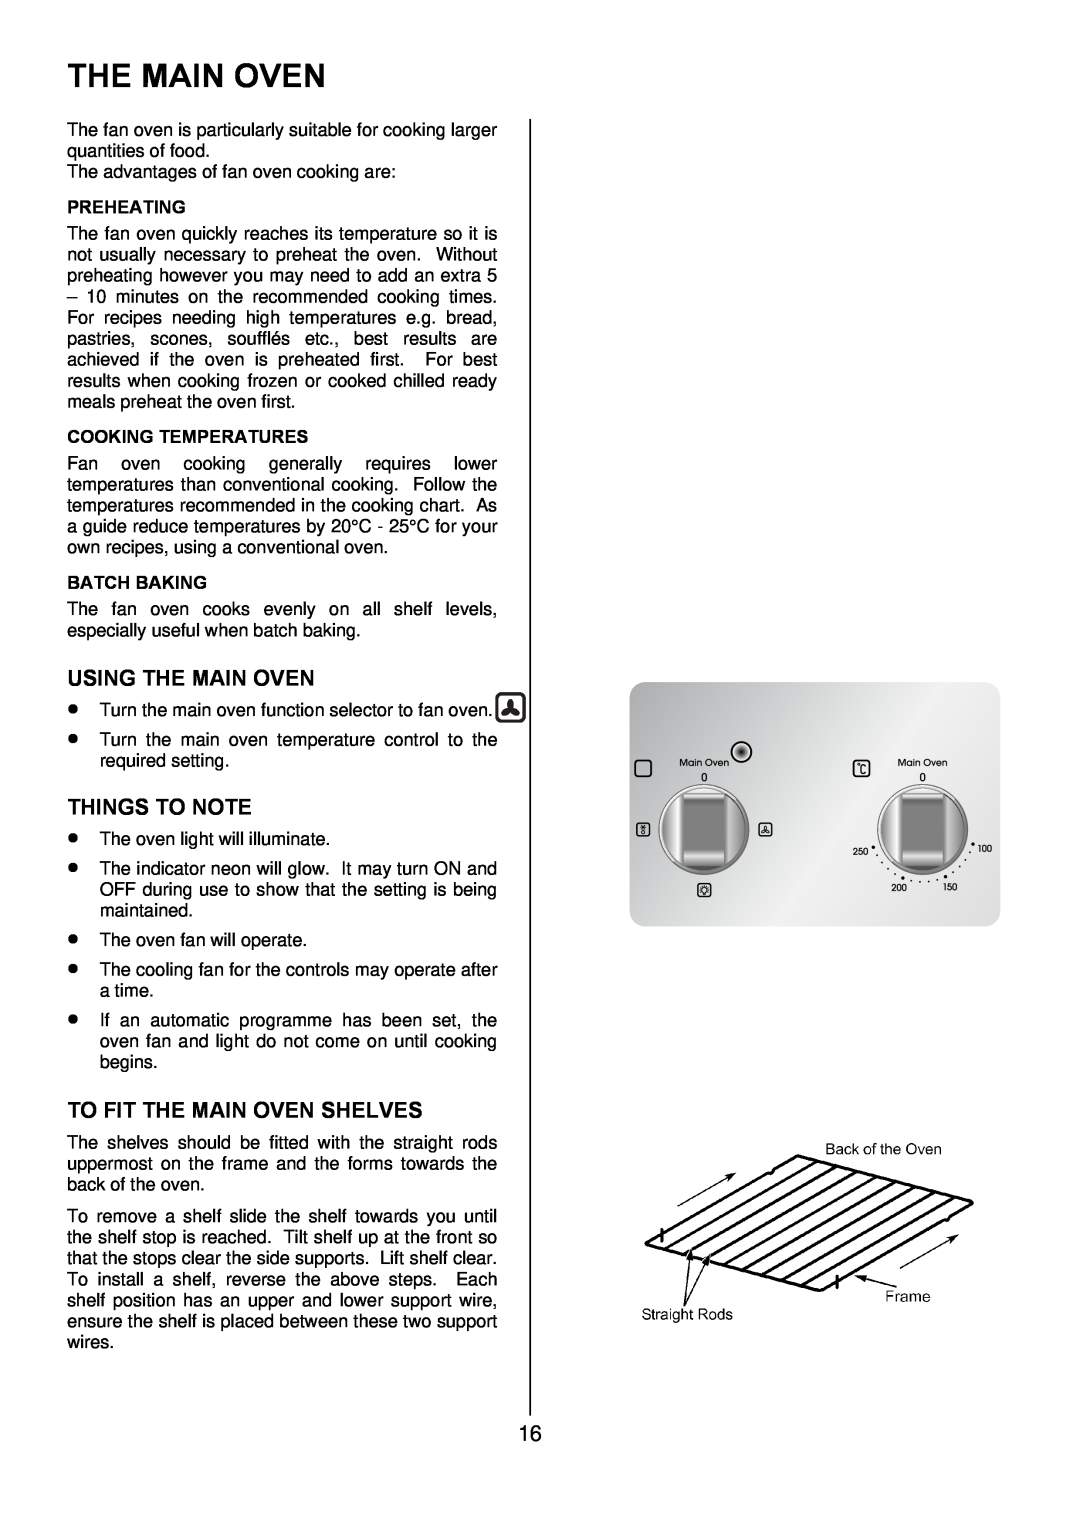 Zanussi ZOD 330 manual Using The Main Oven, To Fit The Main Oven Shelves, Things To Note 